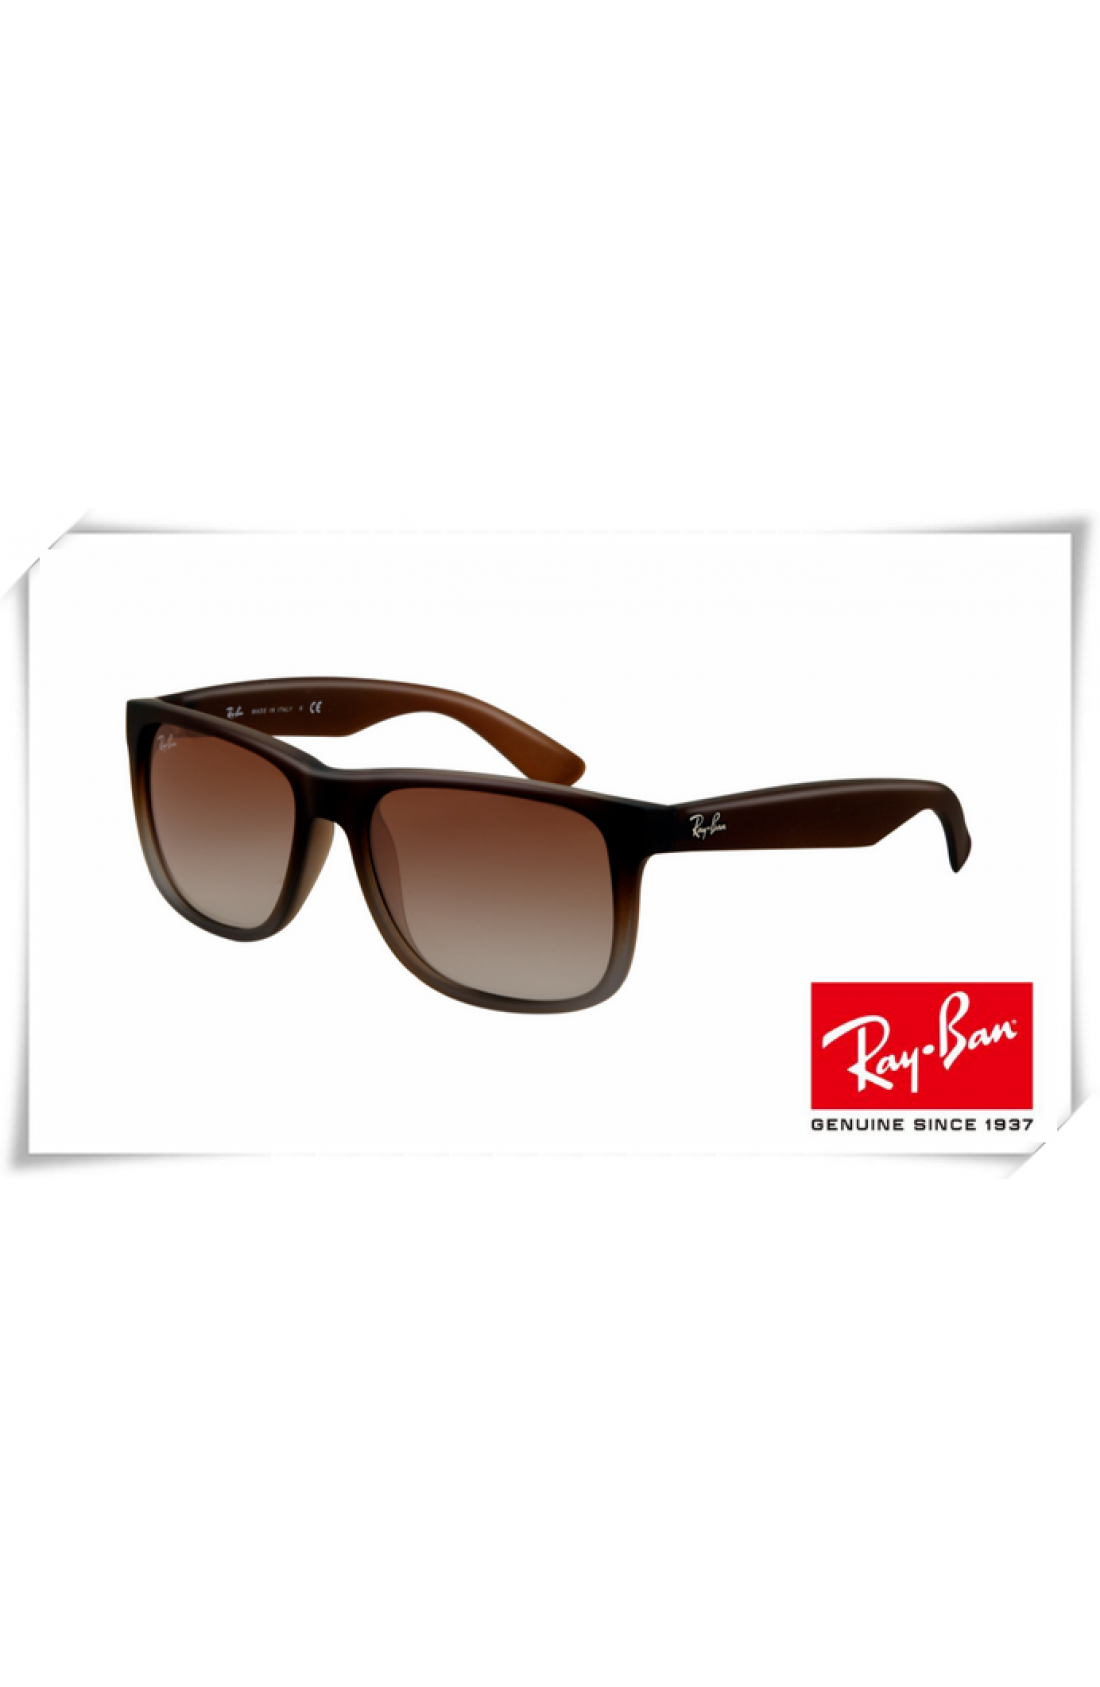 rubber ray bans